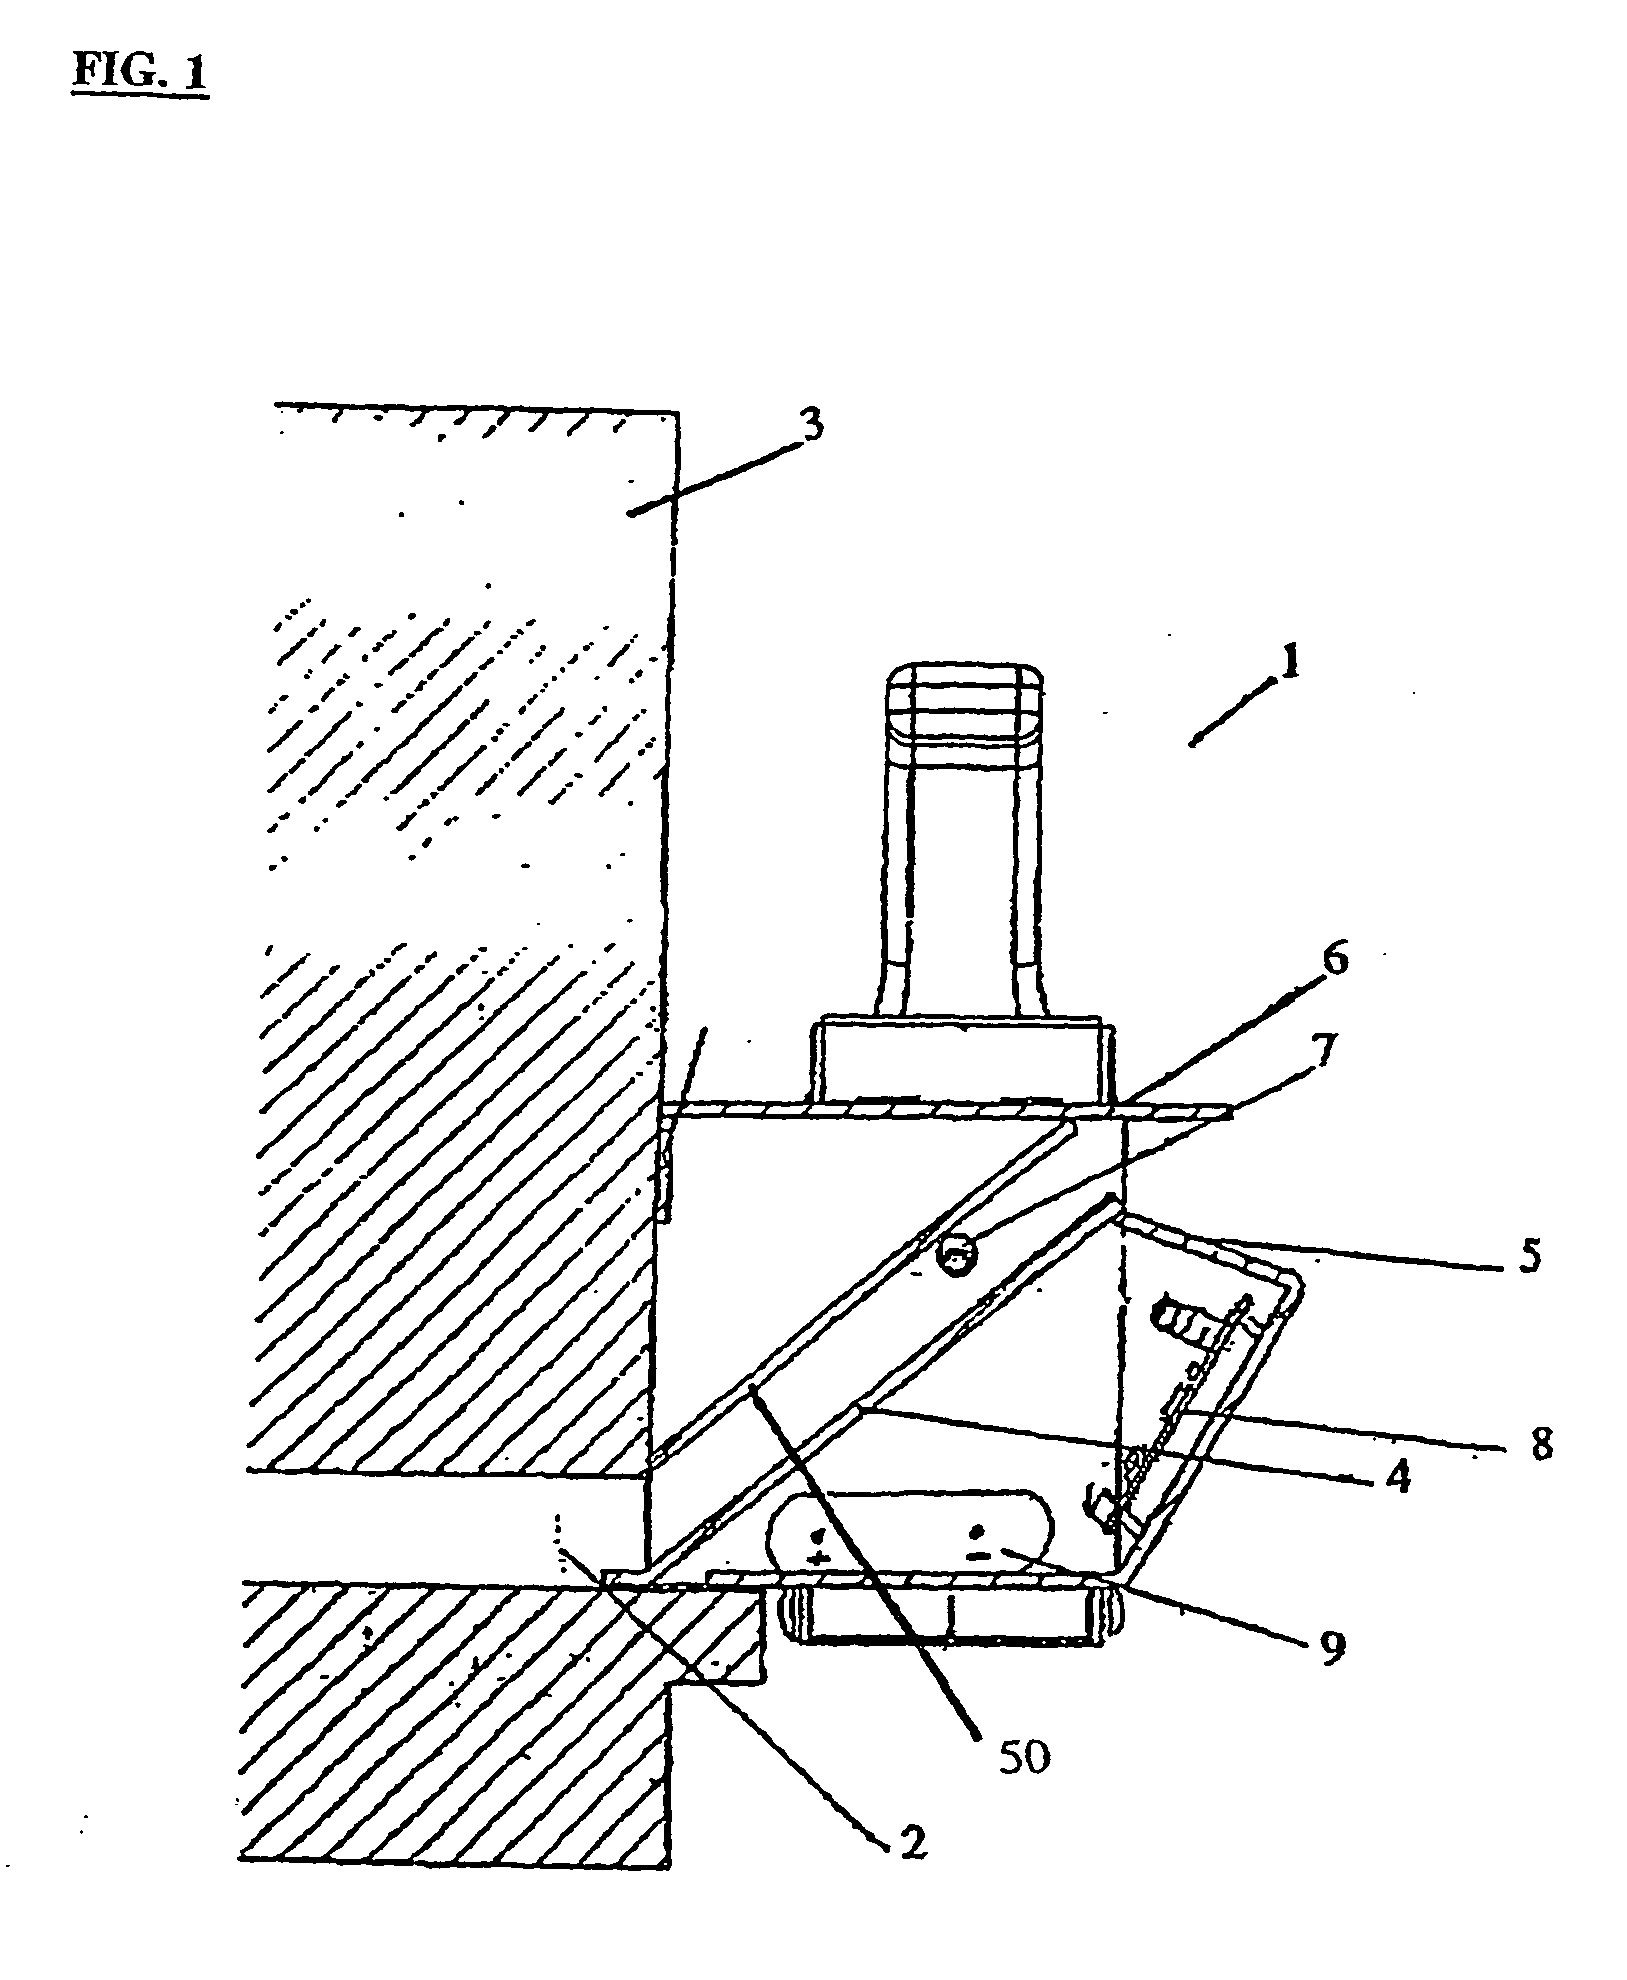 Method and apparatus for distributing treatment agents